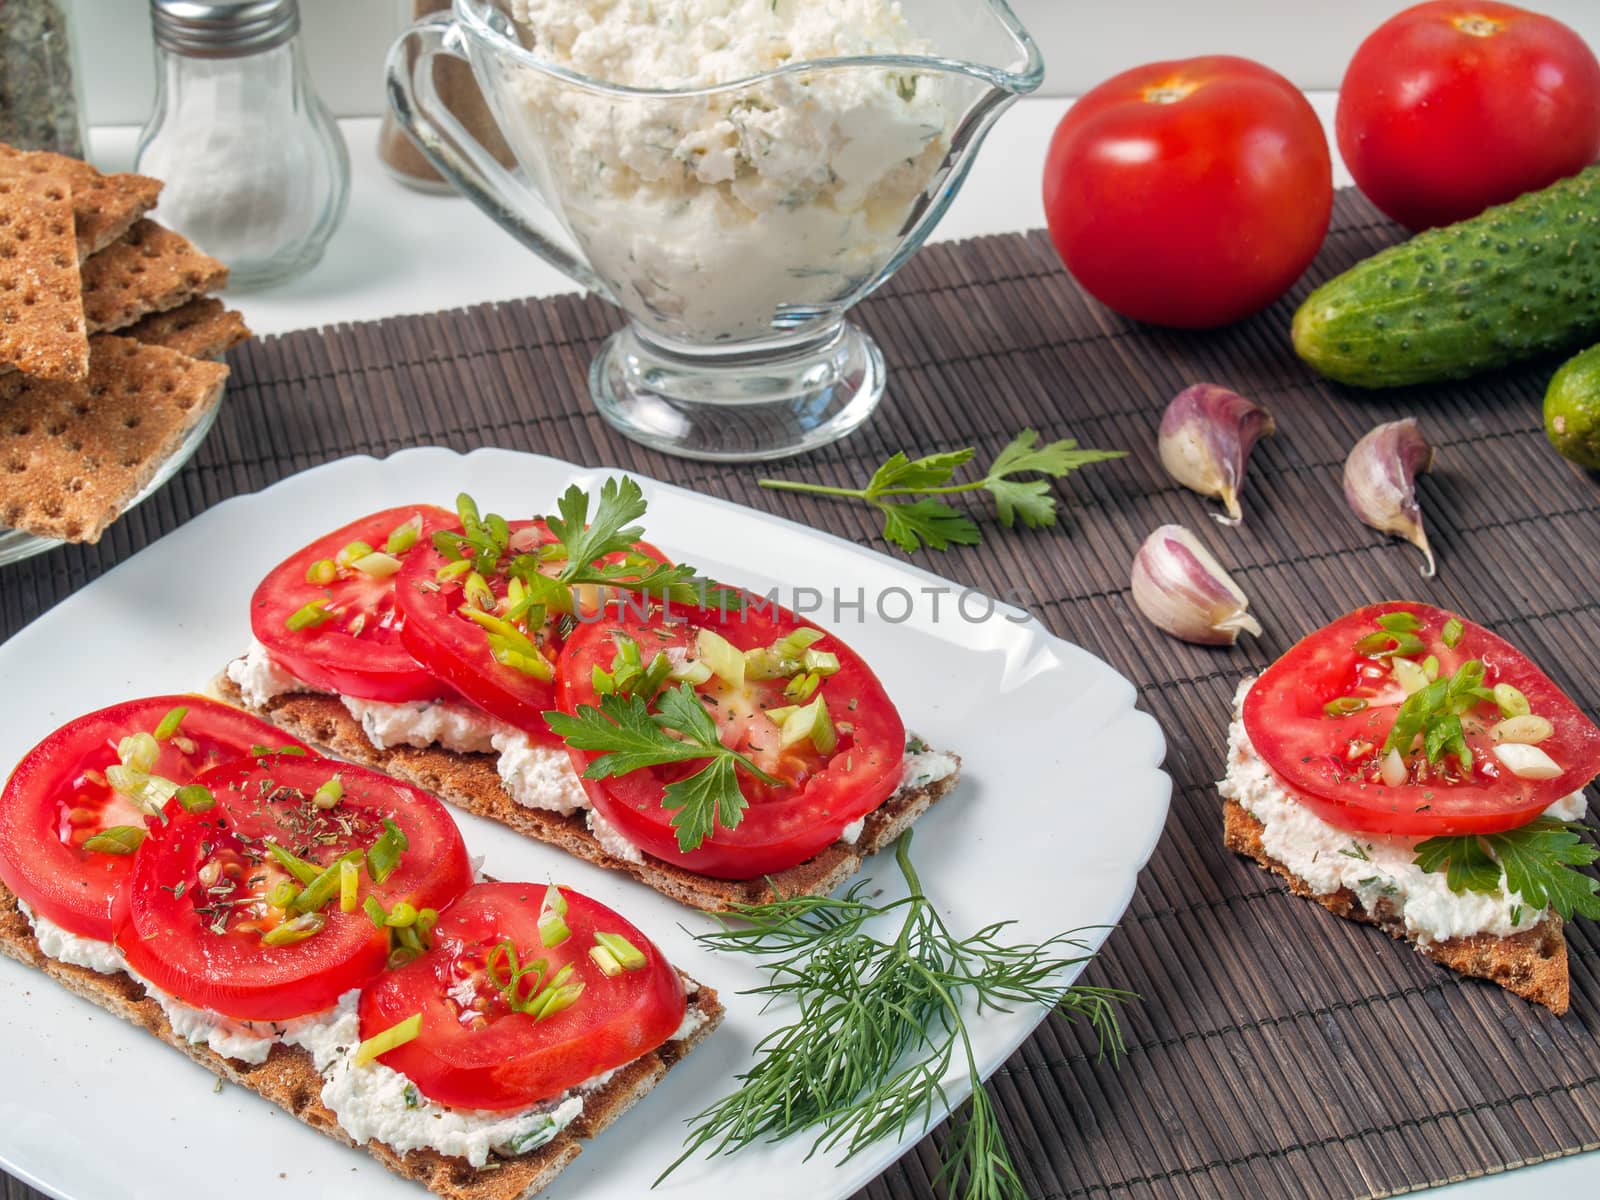 Crispy bread from buckwheat flour smeared with curd cheese on top a tomato with greens and spices is shown close up